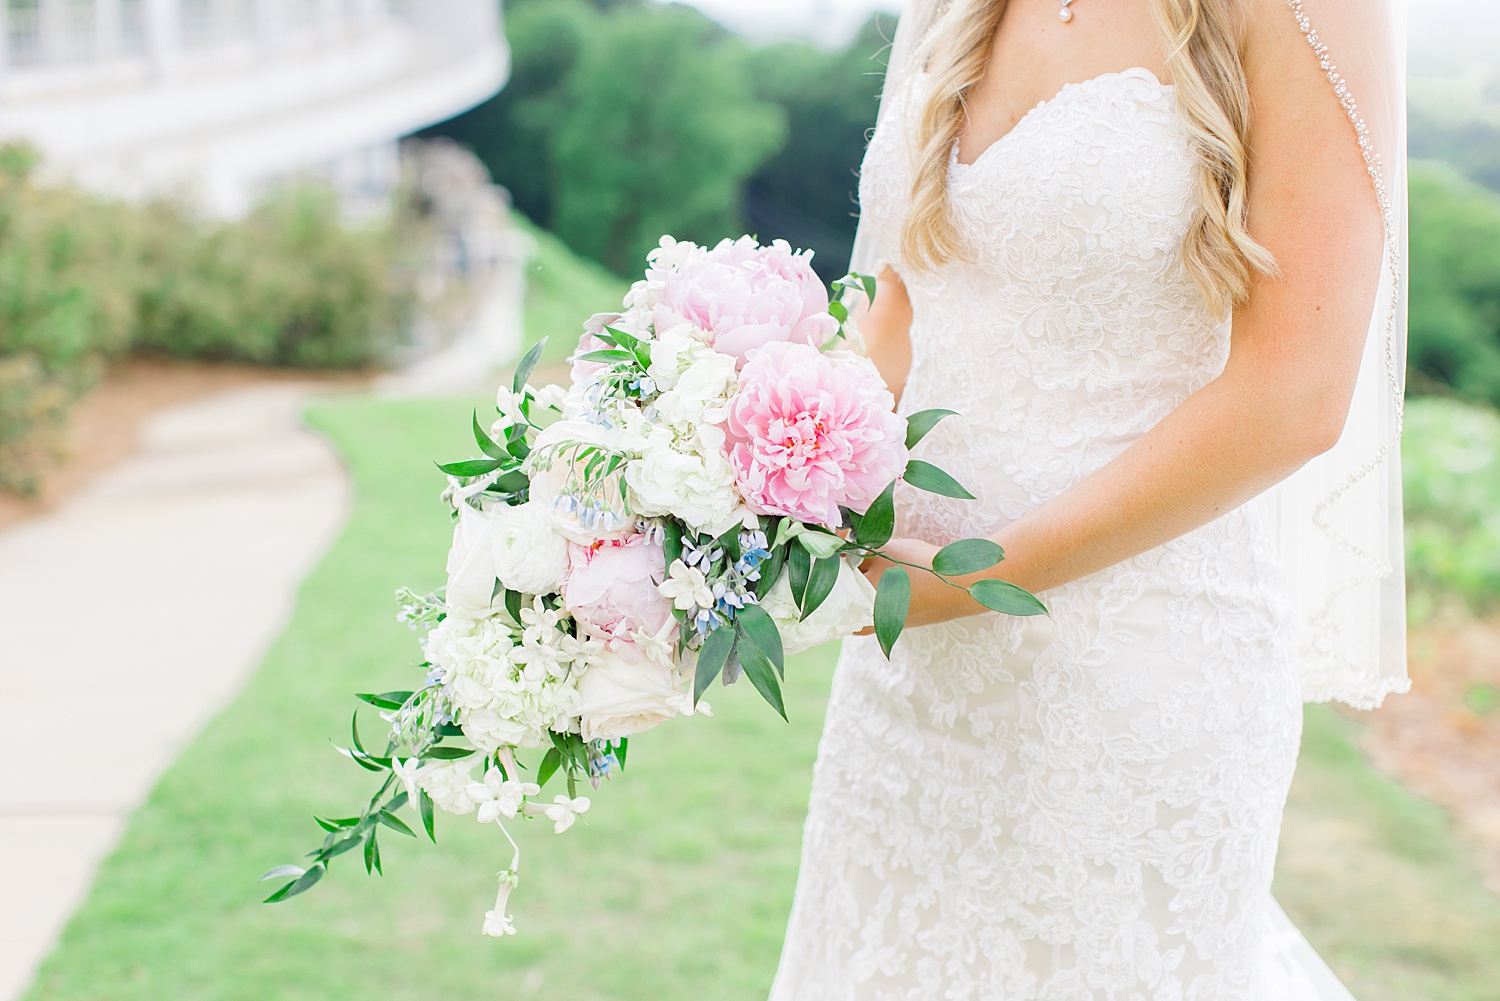 bride holding elegant and classic wedding bouquet of white and pink flowers